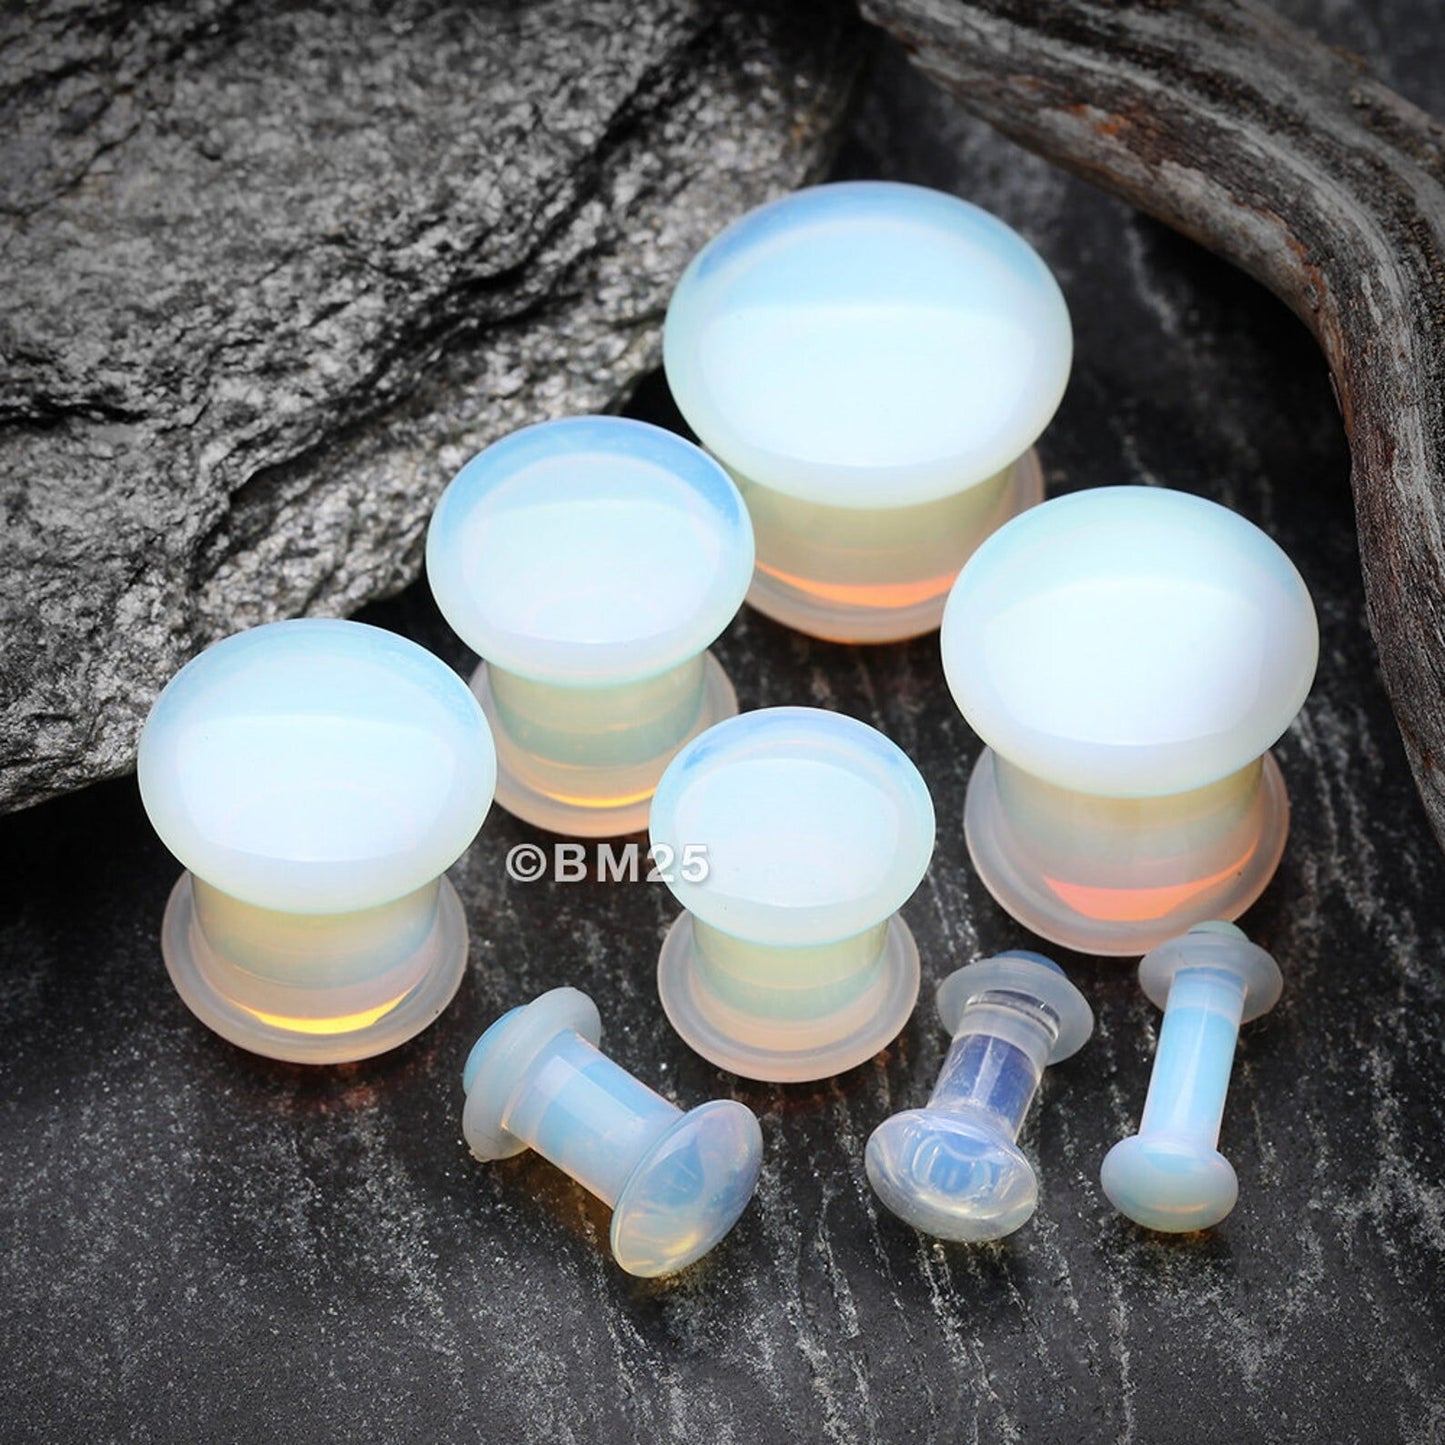 Pair of Opalite Single Flare Stone Ear Plugs Silicone O-Ring Expander synthetic Gauges 8ga - 5/8 inch E554